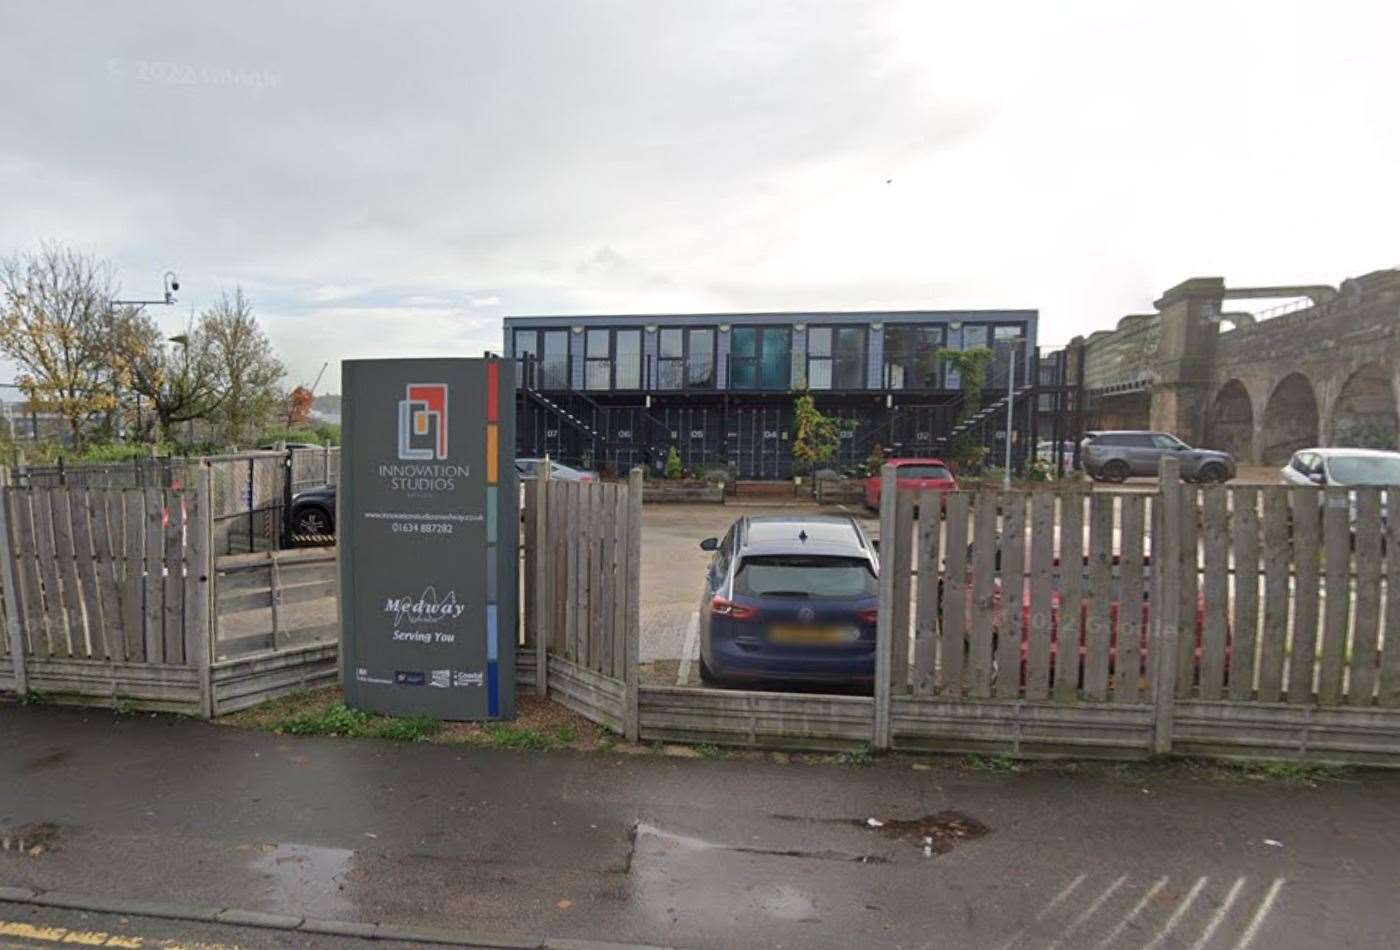 Innovation Studios in Canal Road host 15 office spaces for businesses. Picture: Google